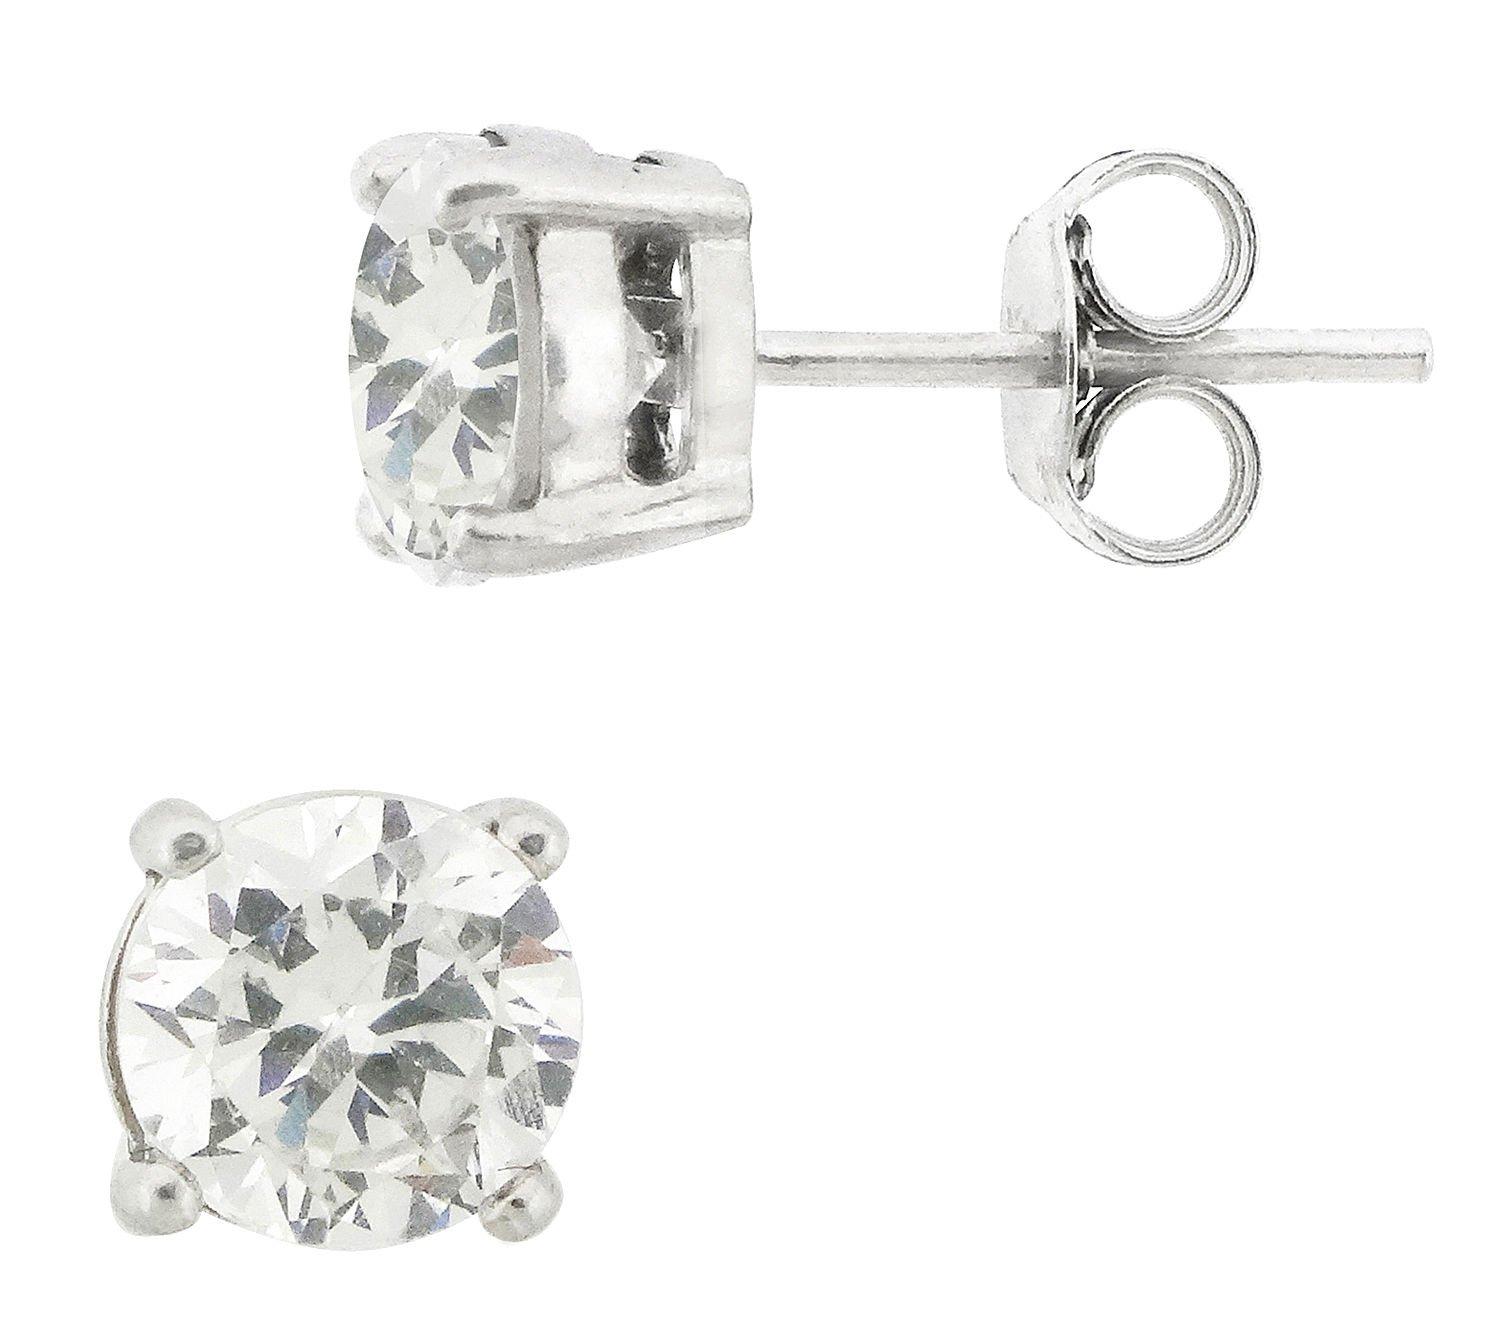 Signature Sterling Silver Round CZ Stud Earrings 729881284445 | eBay